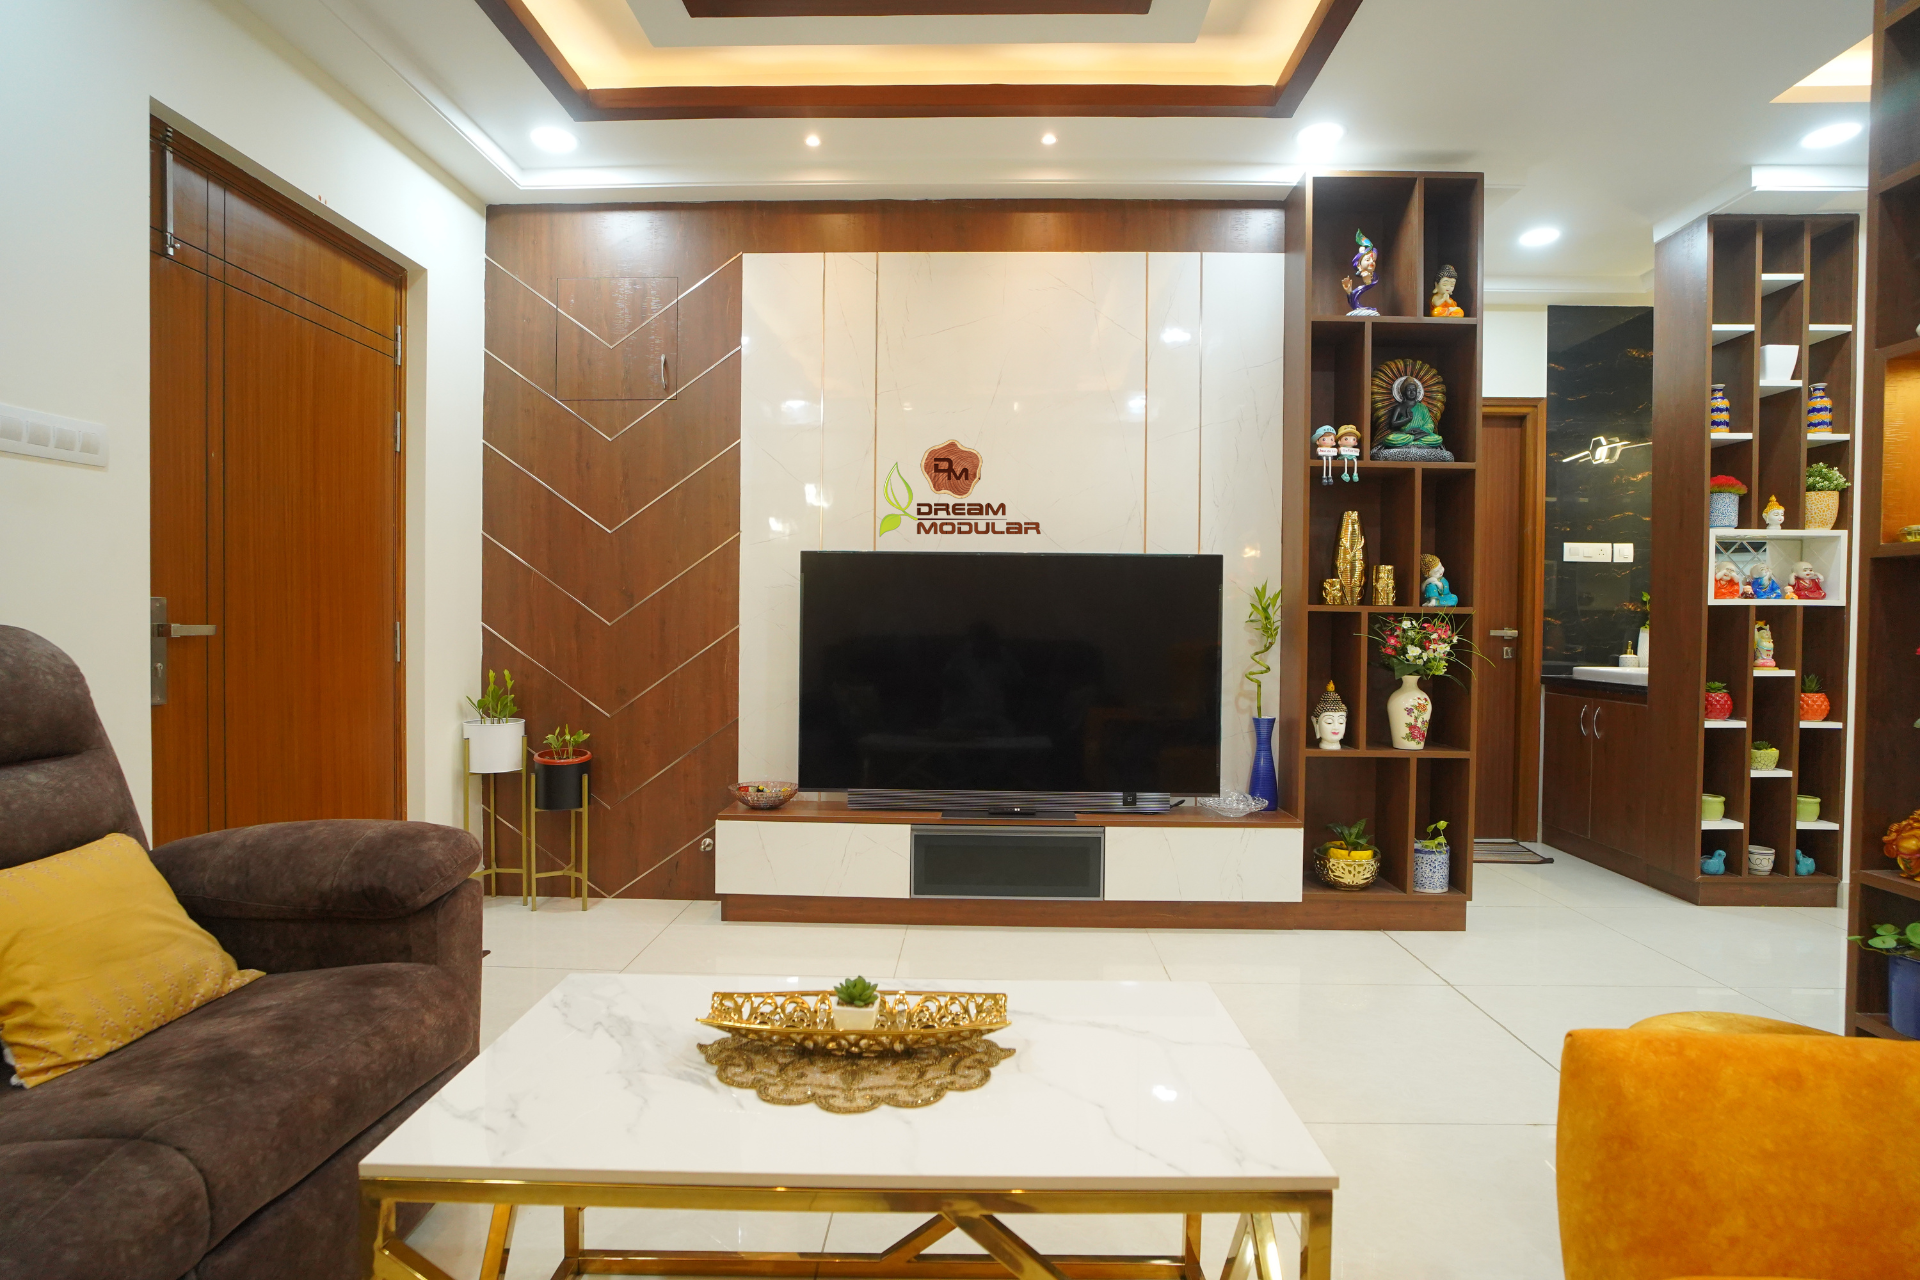 A living room with a tv unit and a coffee table that showcases an impeccable interior design.